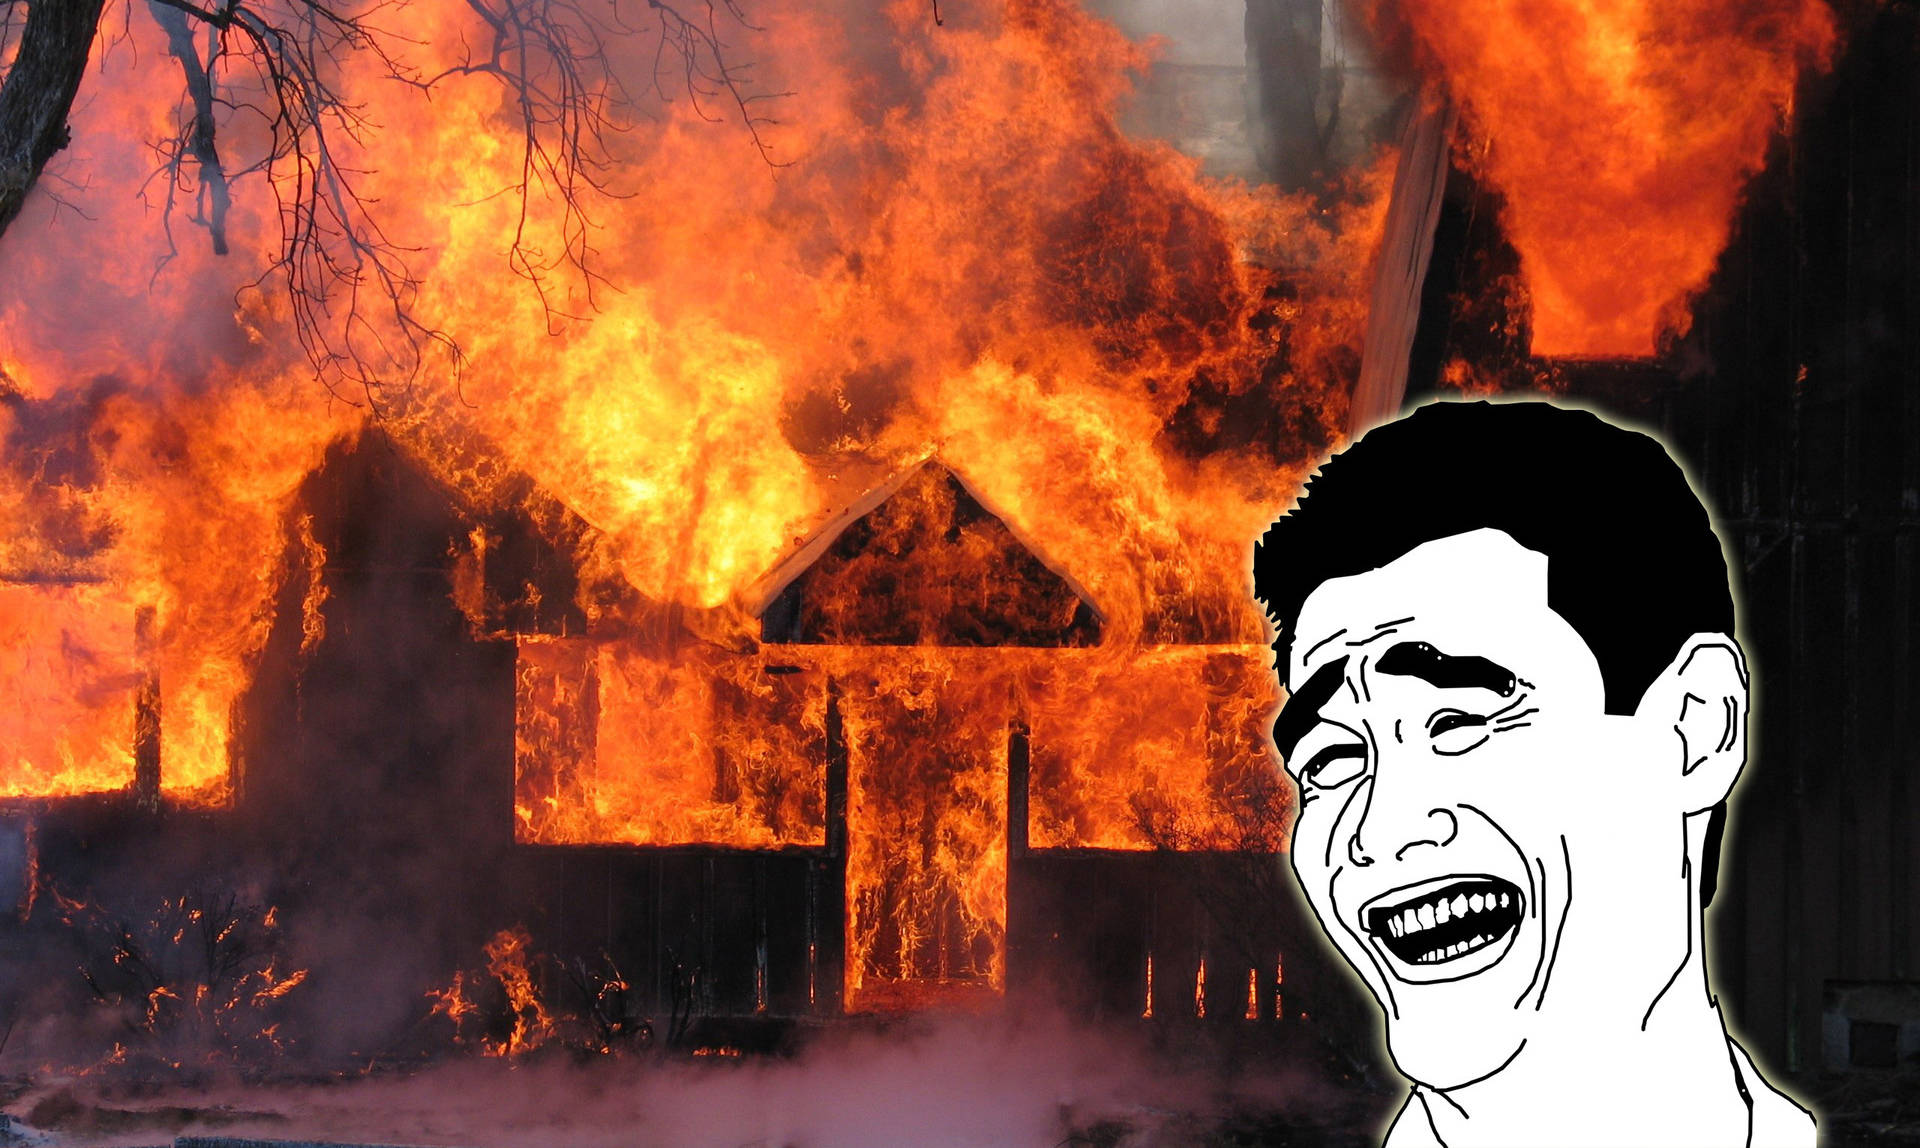 Yao Ming Face Meme And Burning House Wallpaper